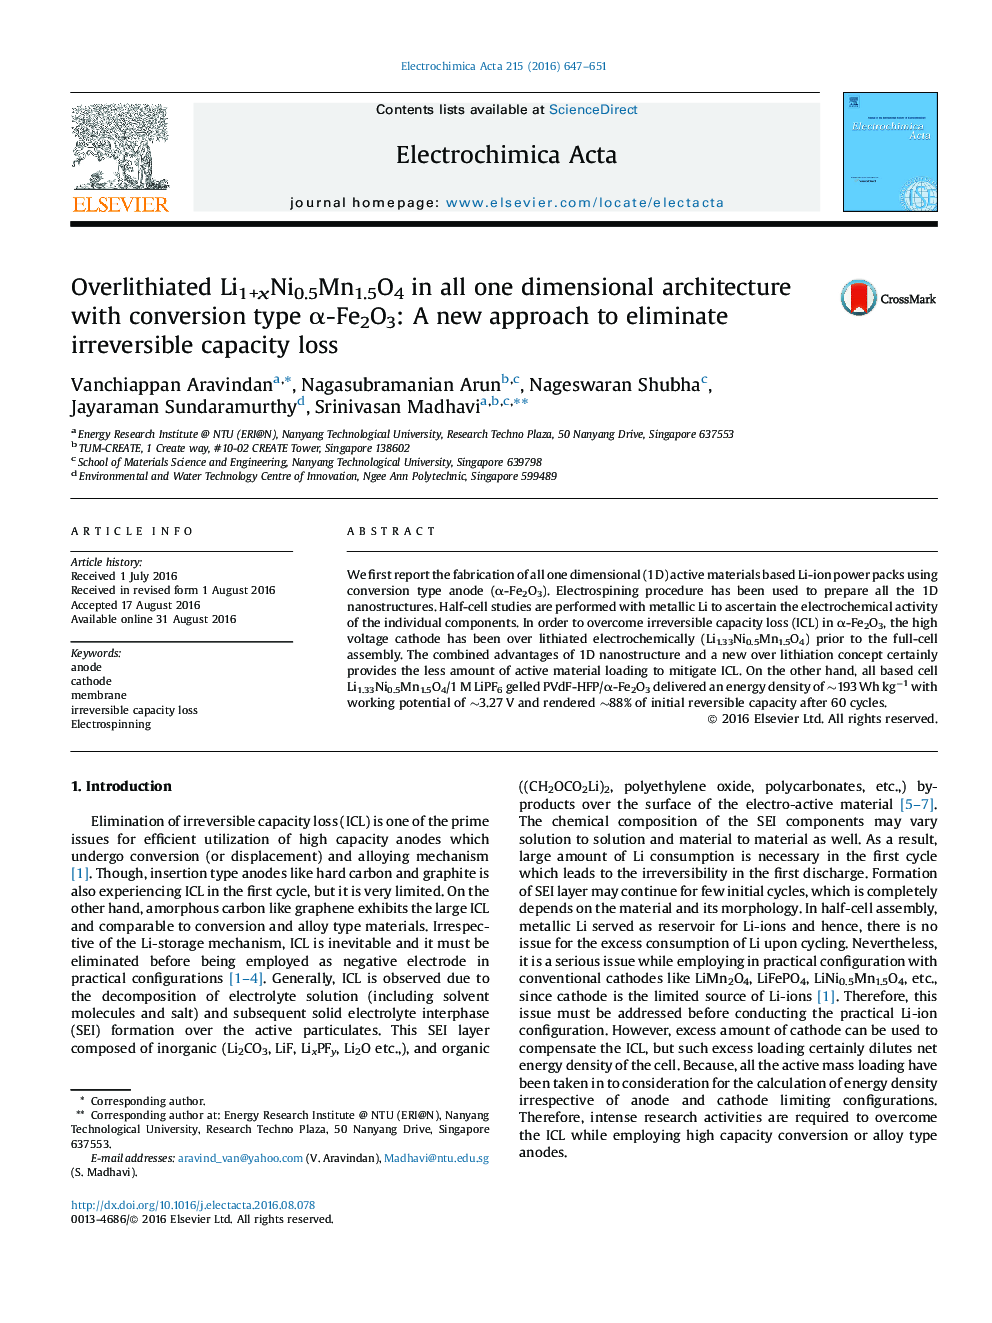 Overlithiated Li1+xNi0.5Mn1.5O4 in all one dimensional architecture with conversion type Î±-Fe2O3: A new approach to eliminate irreversible capacity loss